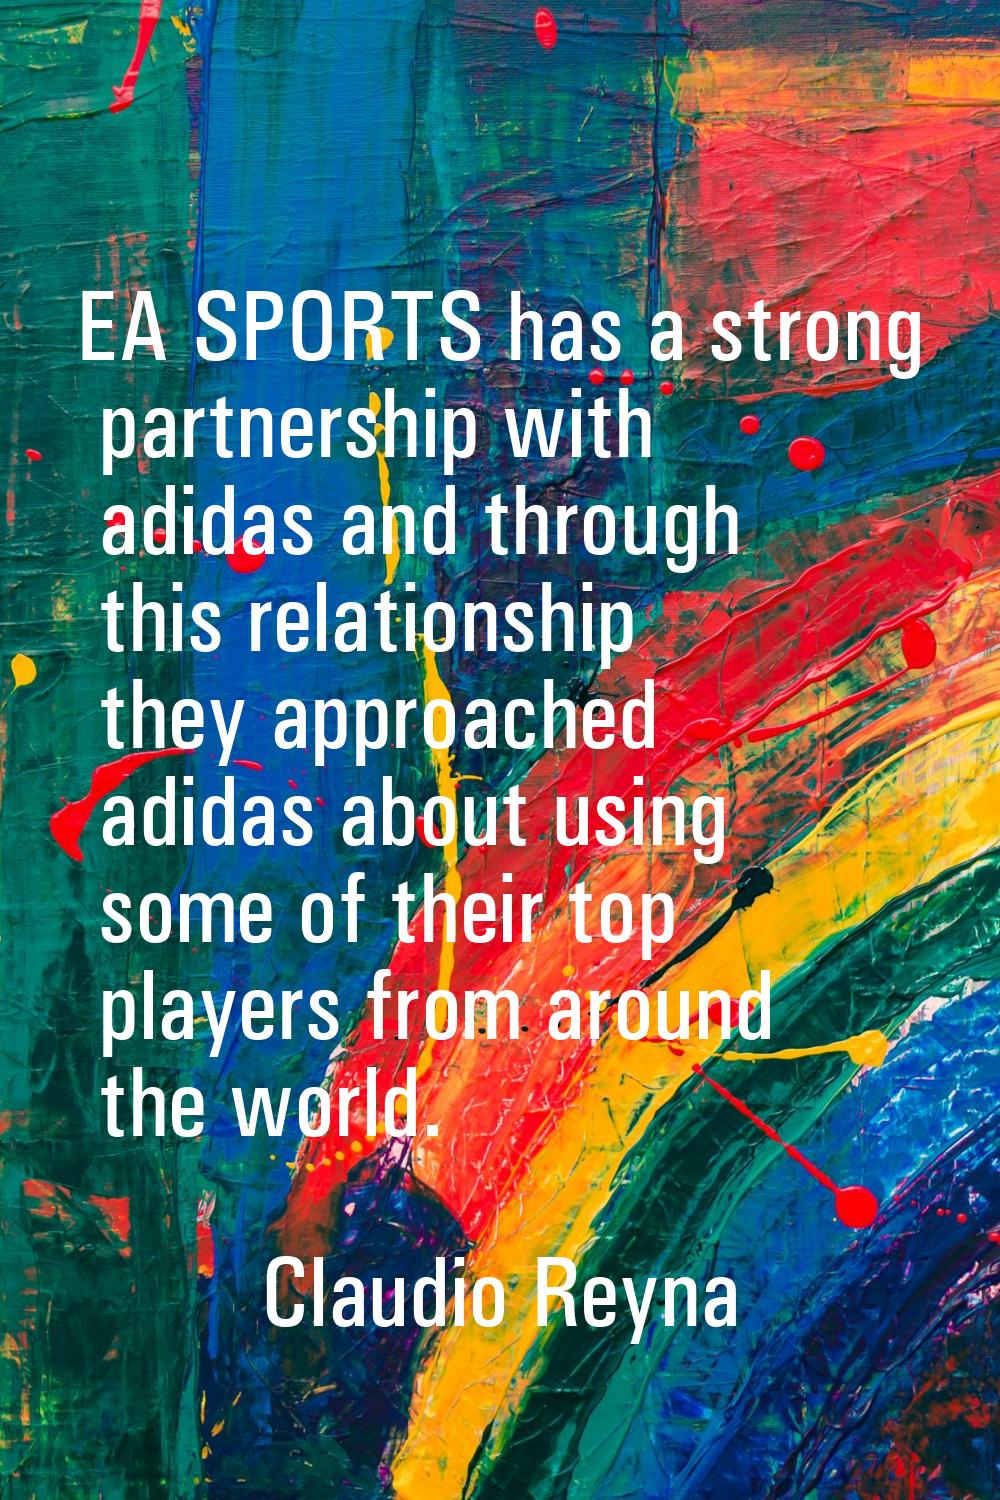 EA SPORTS has a strong partnership with adidas and through this relationship they approached adidas